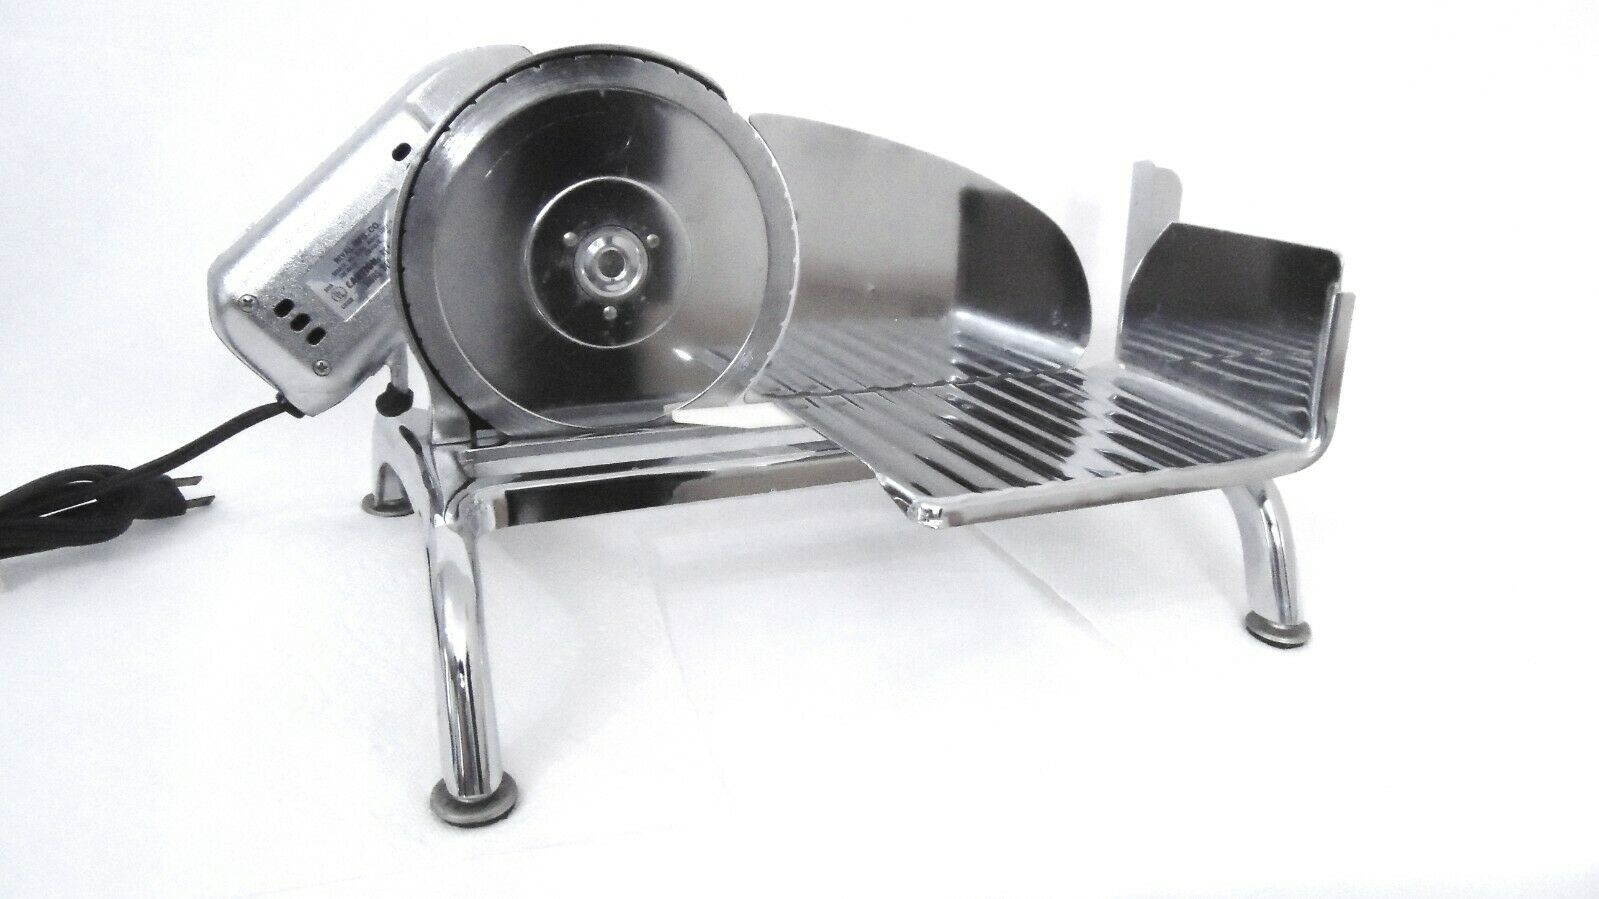 automatic meat slicer